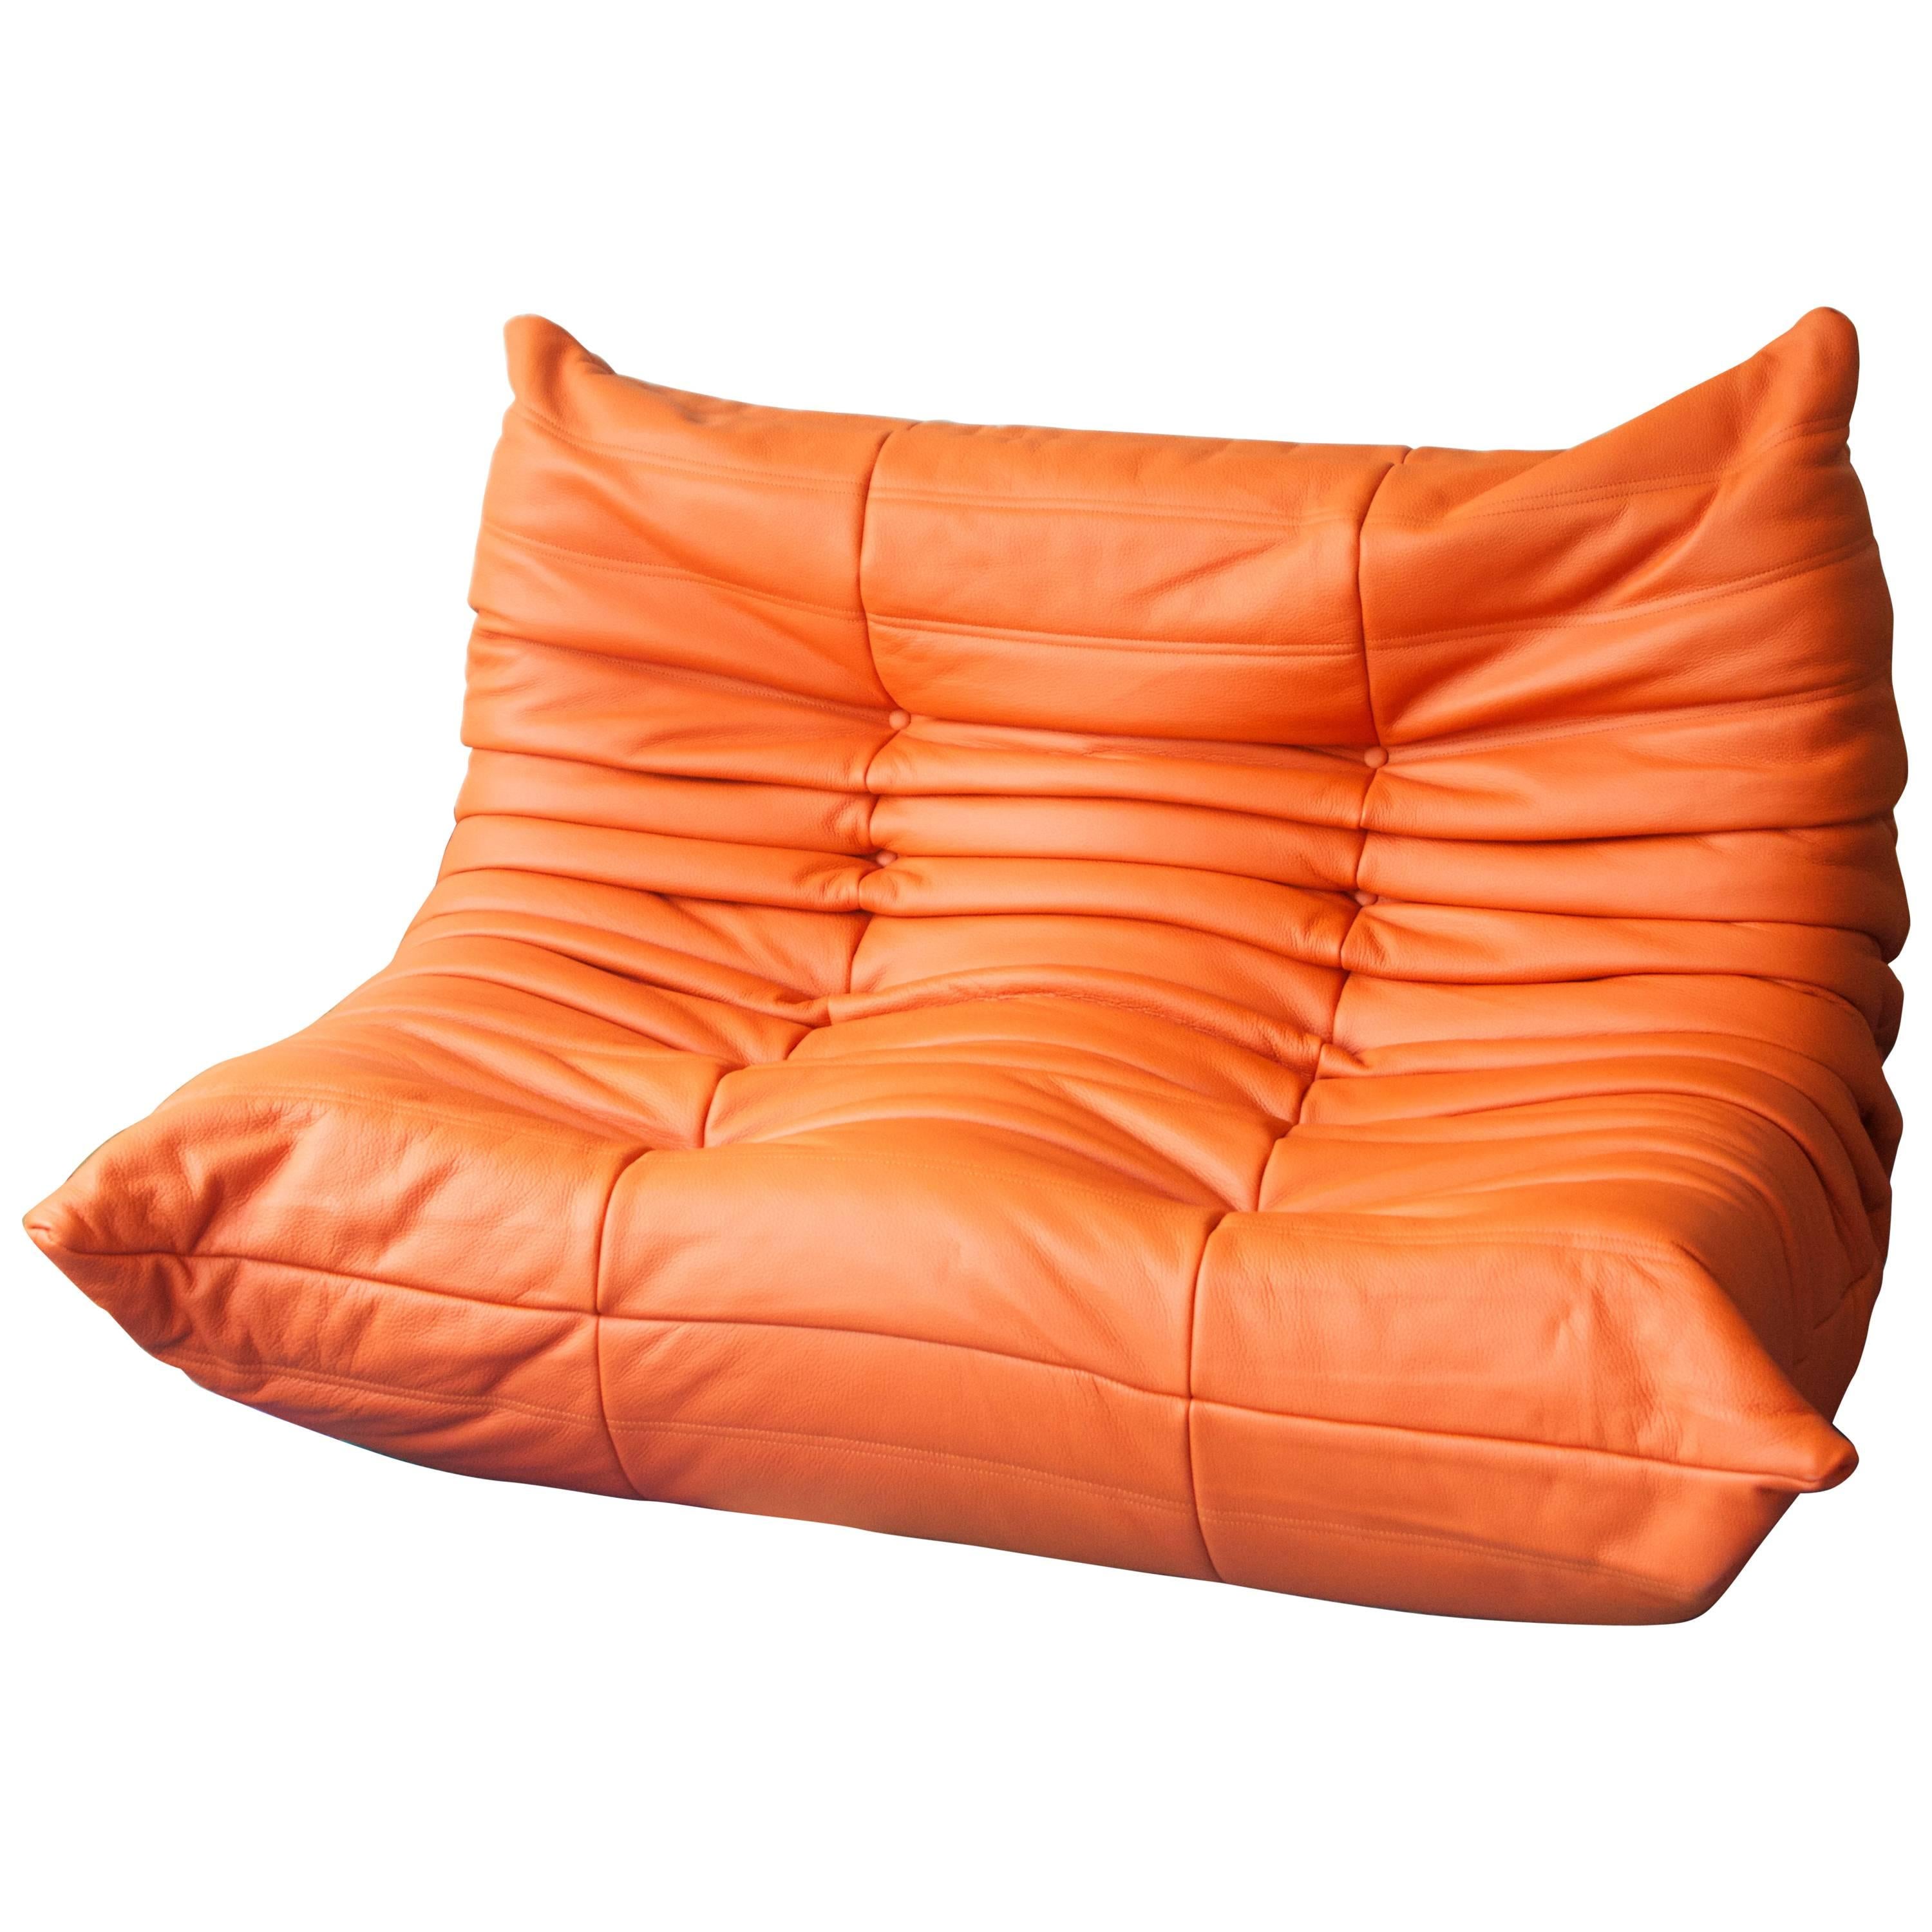 Orange Leather Two-Seat Togo Sofa by Michel Ducaroy for Ligne Roset For Sale